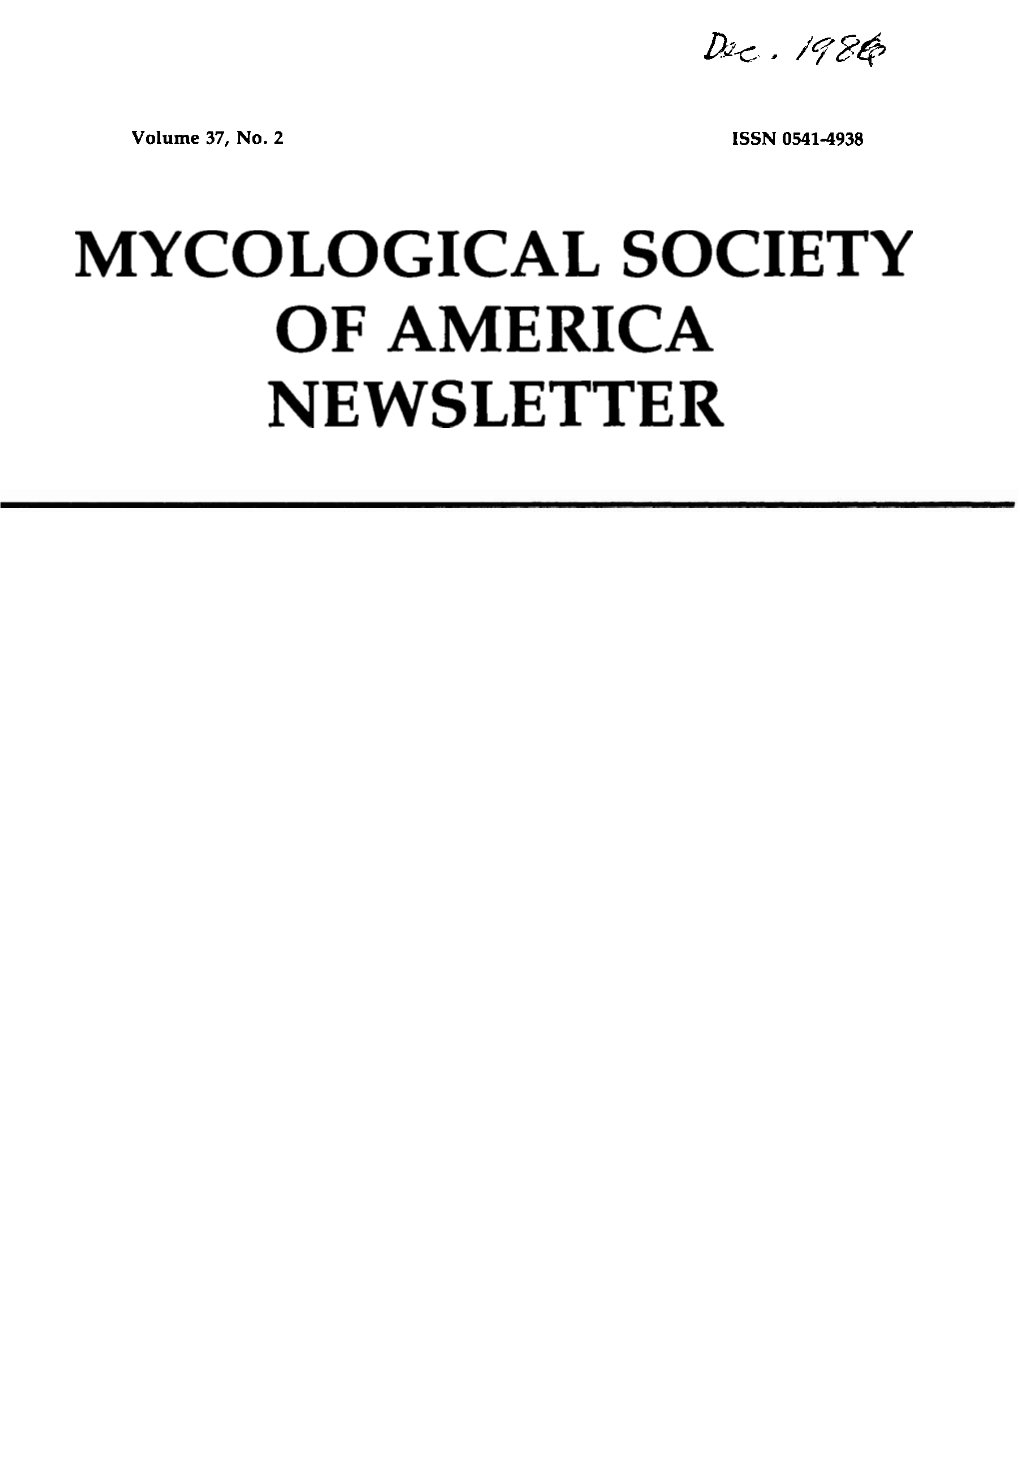 MYCOLOGICAL SOCIETY of AMERICA NEWSLETTER Editor's Note